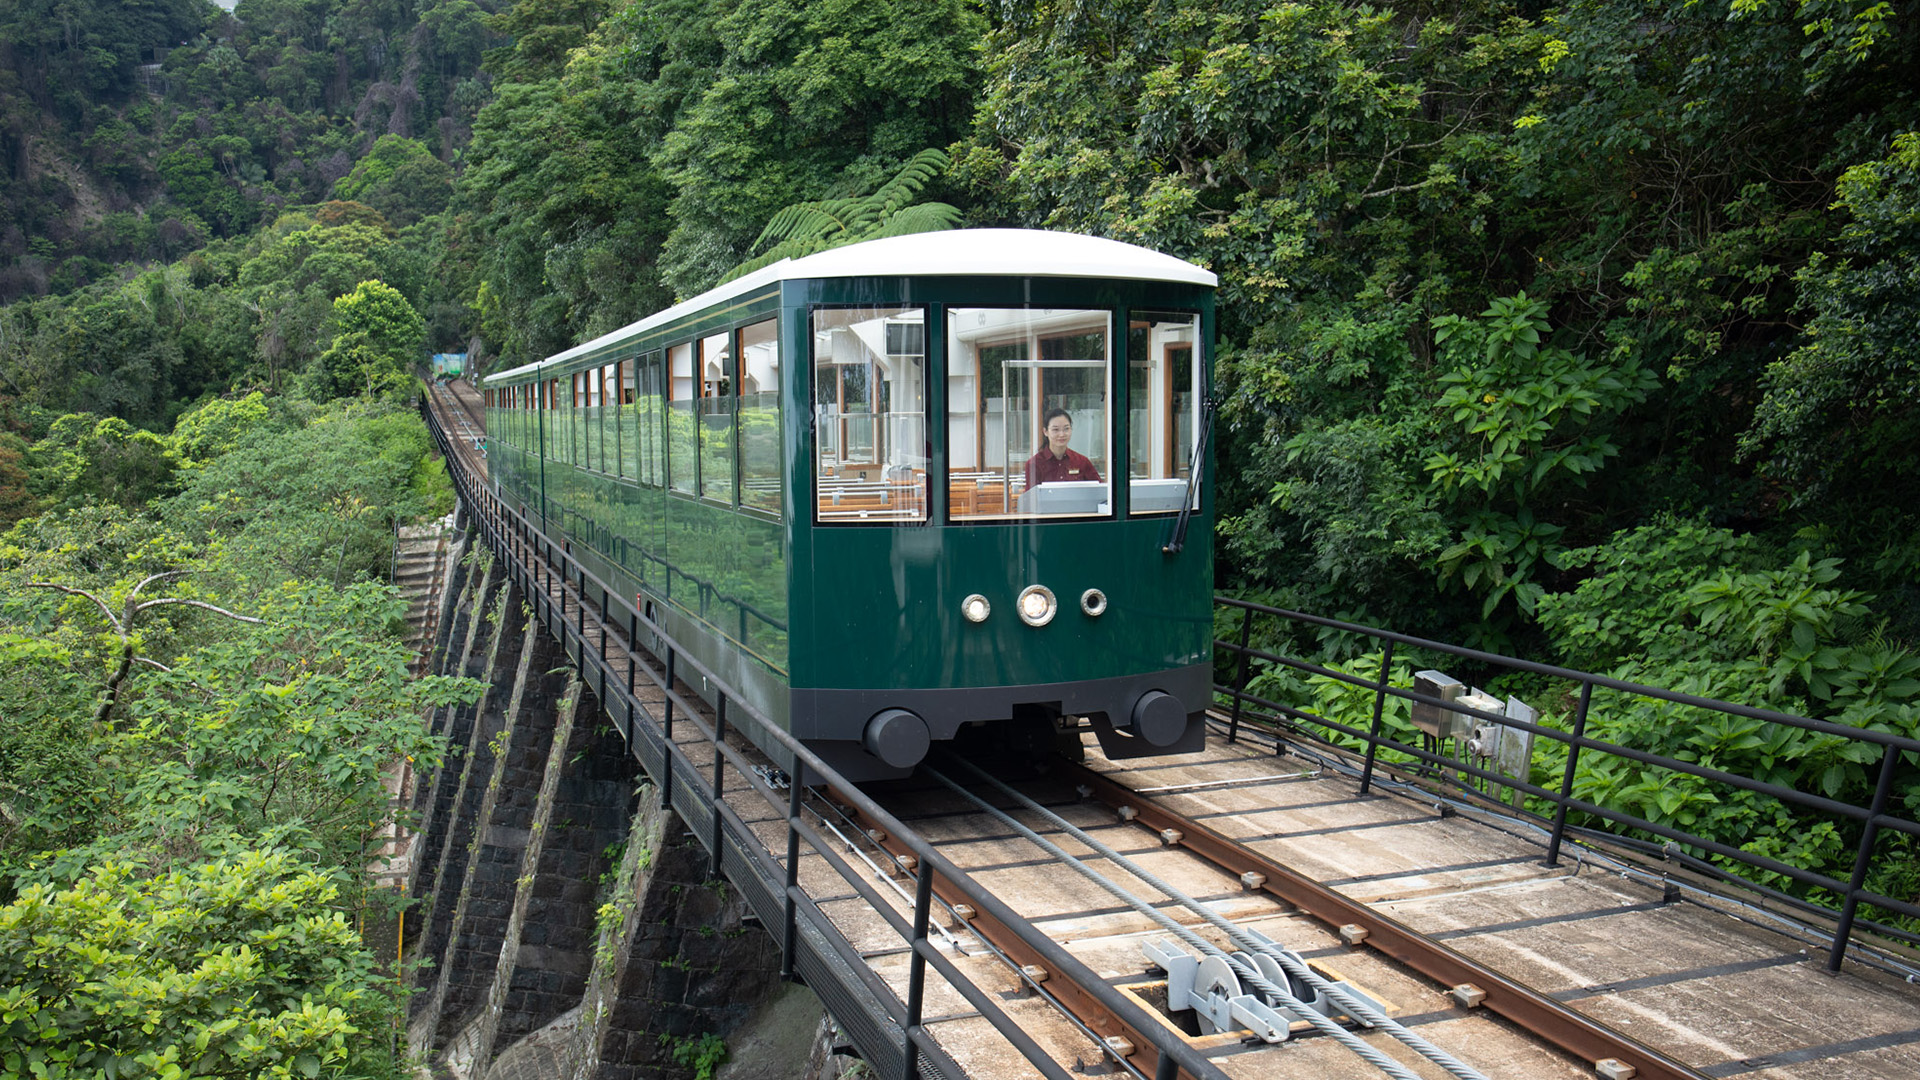 One of the most popular ways to get to the Peak is by the Peak Tram.